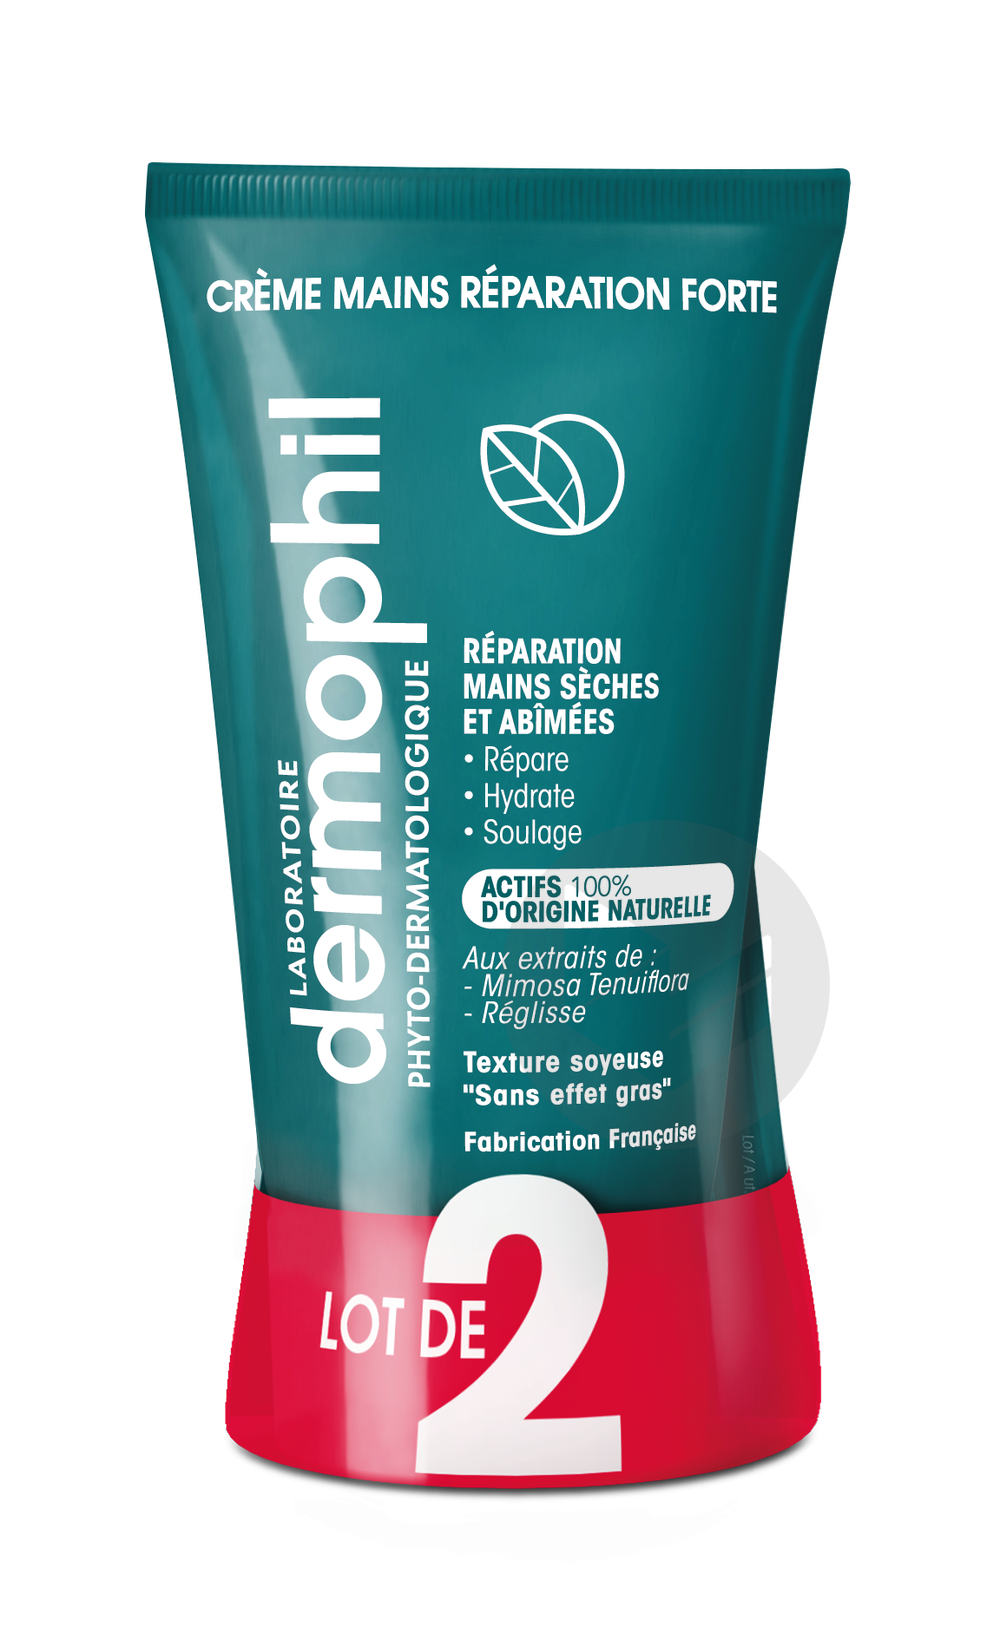 Lot 2 Cremes  Mains Reparation Forte 75Ml